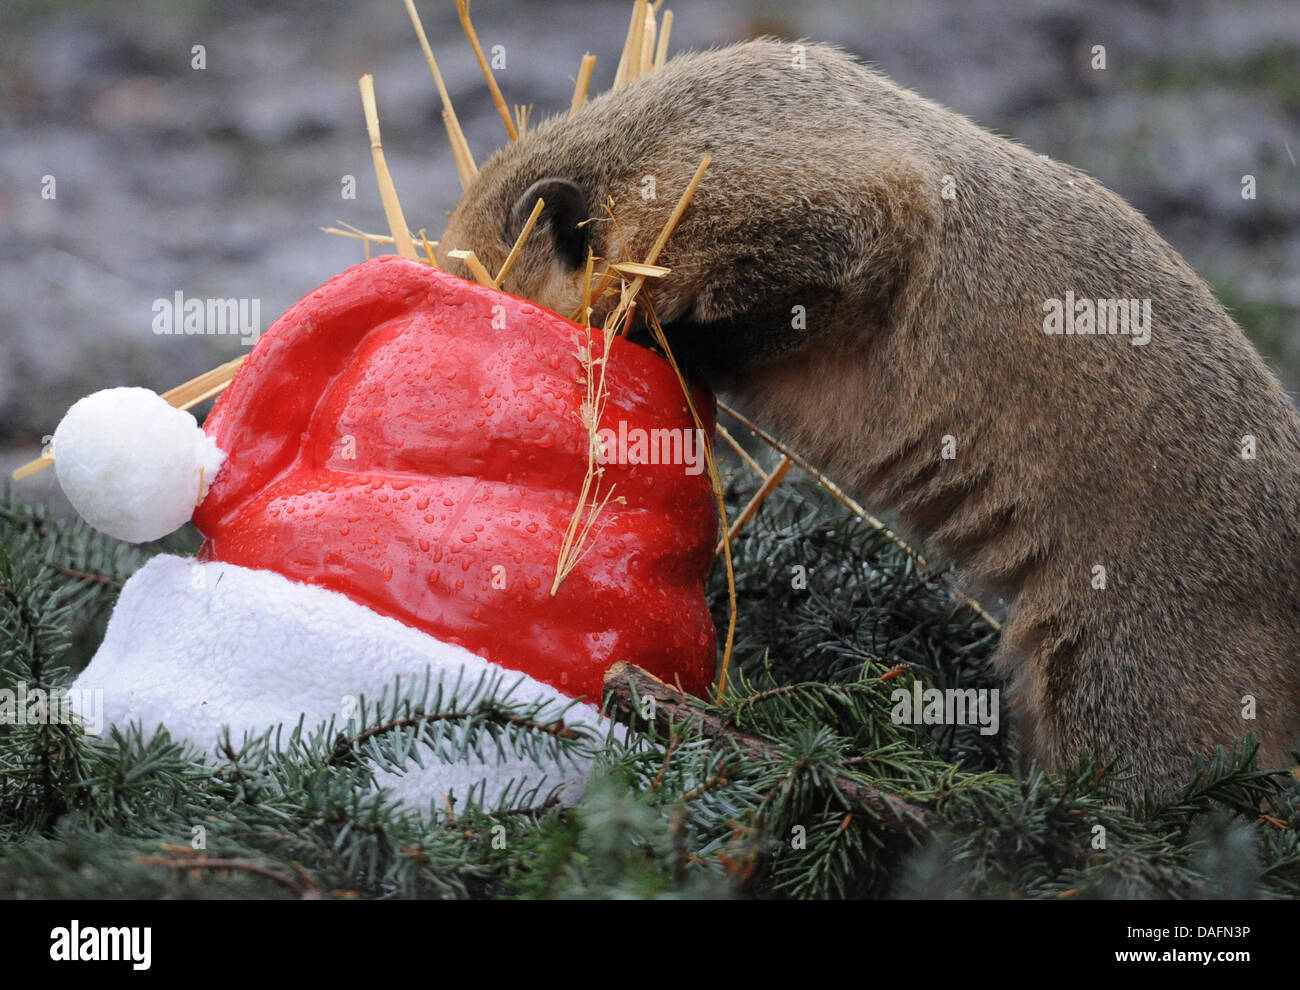 A coati sticks its nose into a St. Nicholas hat filled with delicacies at Hagenbeck Zoo in Hamburg, Germany, 05 December 2011. The 18 coatis celebrate St. Nicholas Day one day ahead. Photo: Angelika Warmuth Stock Photo